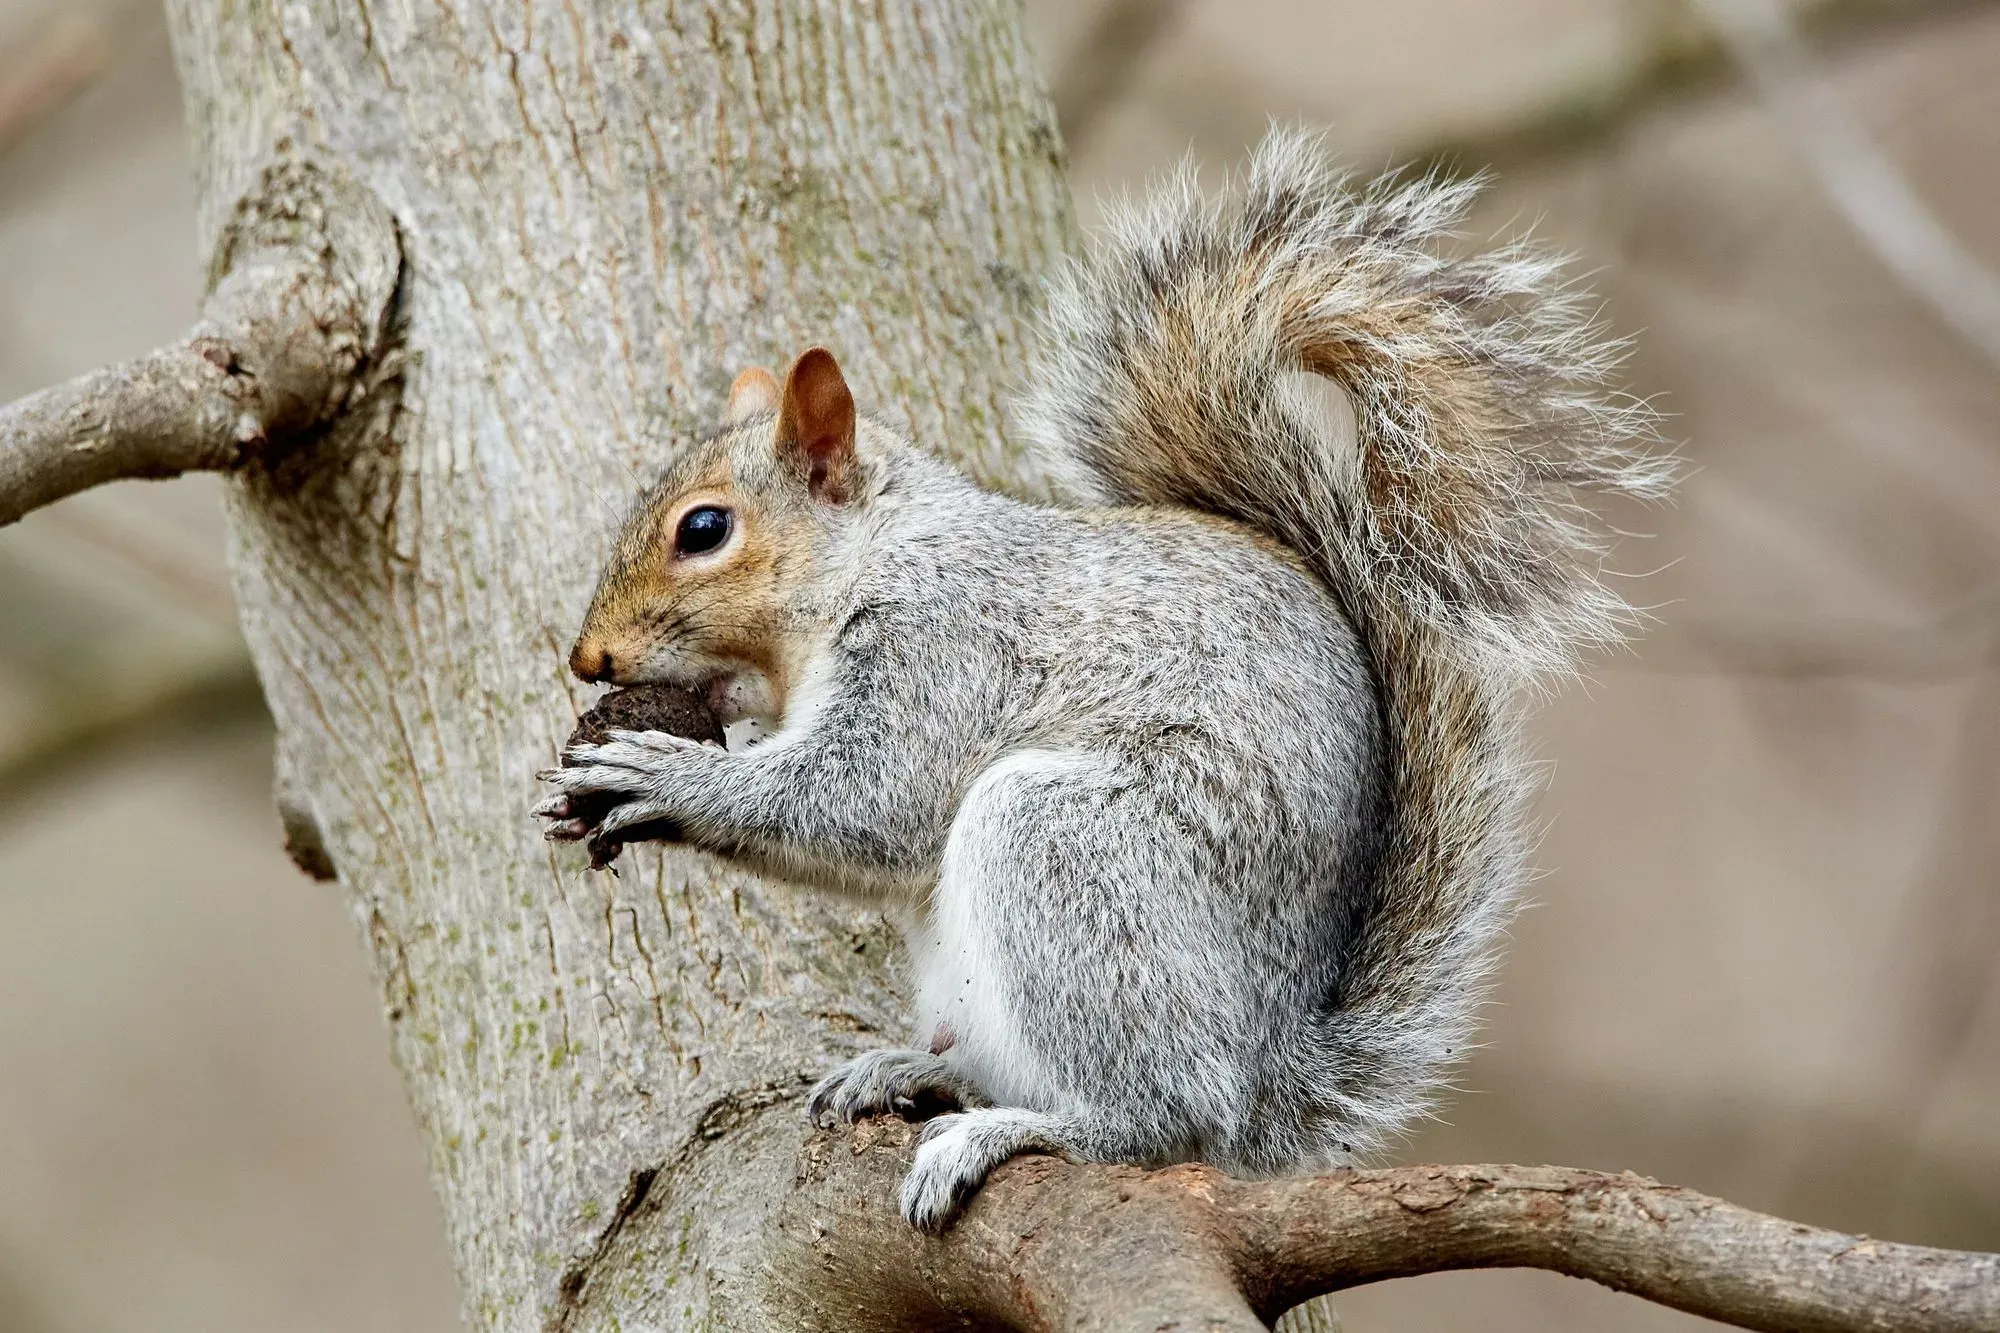 At some point in time, we have either seen squirrels eating chocolate in a park or have even offered them some ourselves, but have you ever wondered, can squirrels eat chocolate?